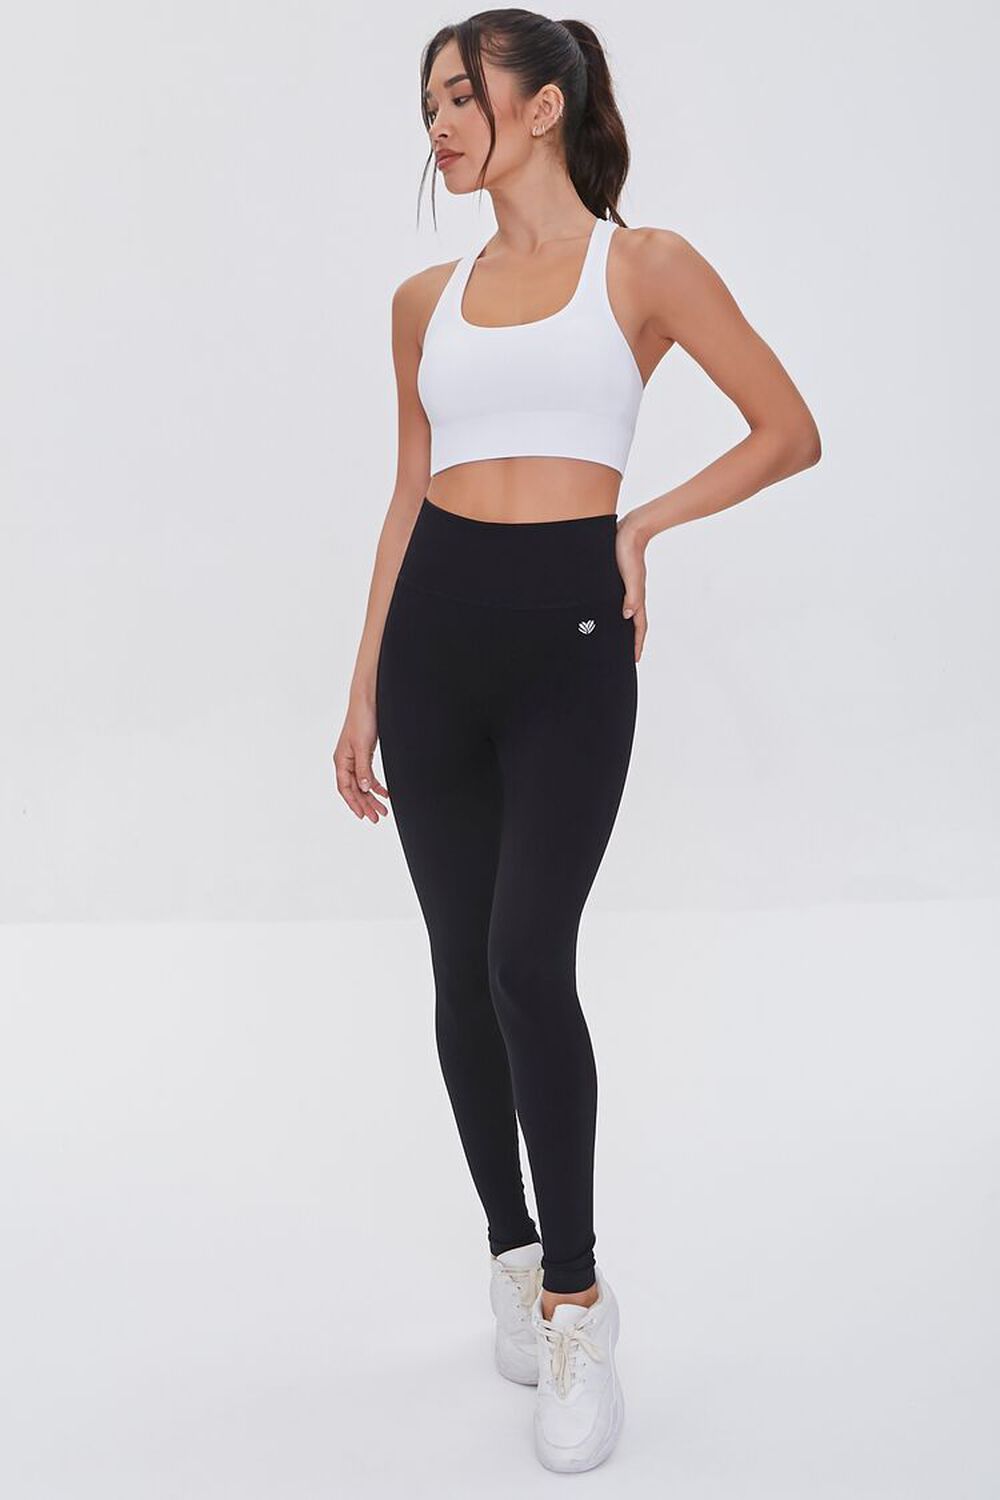 Buy Ultimate Black Active High Rise Sports Sculpting Leggings from